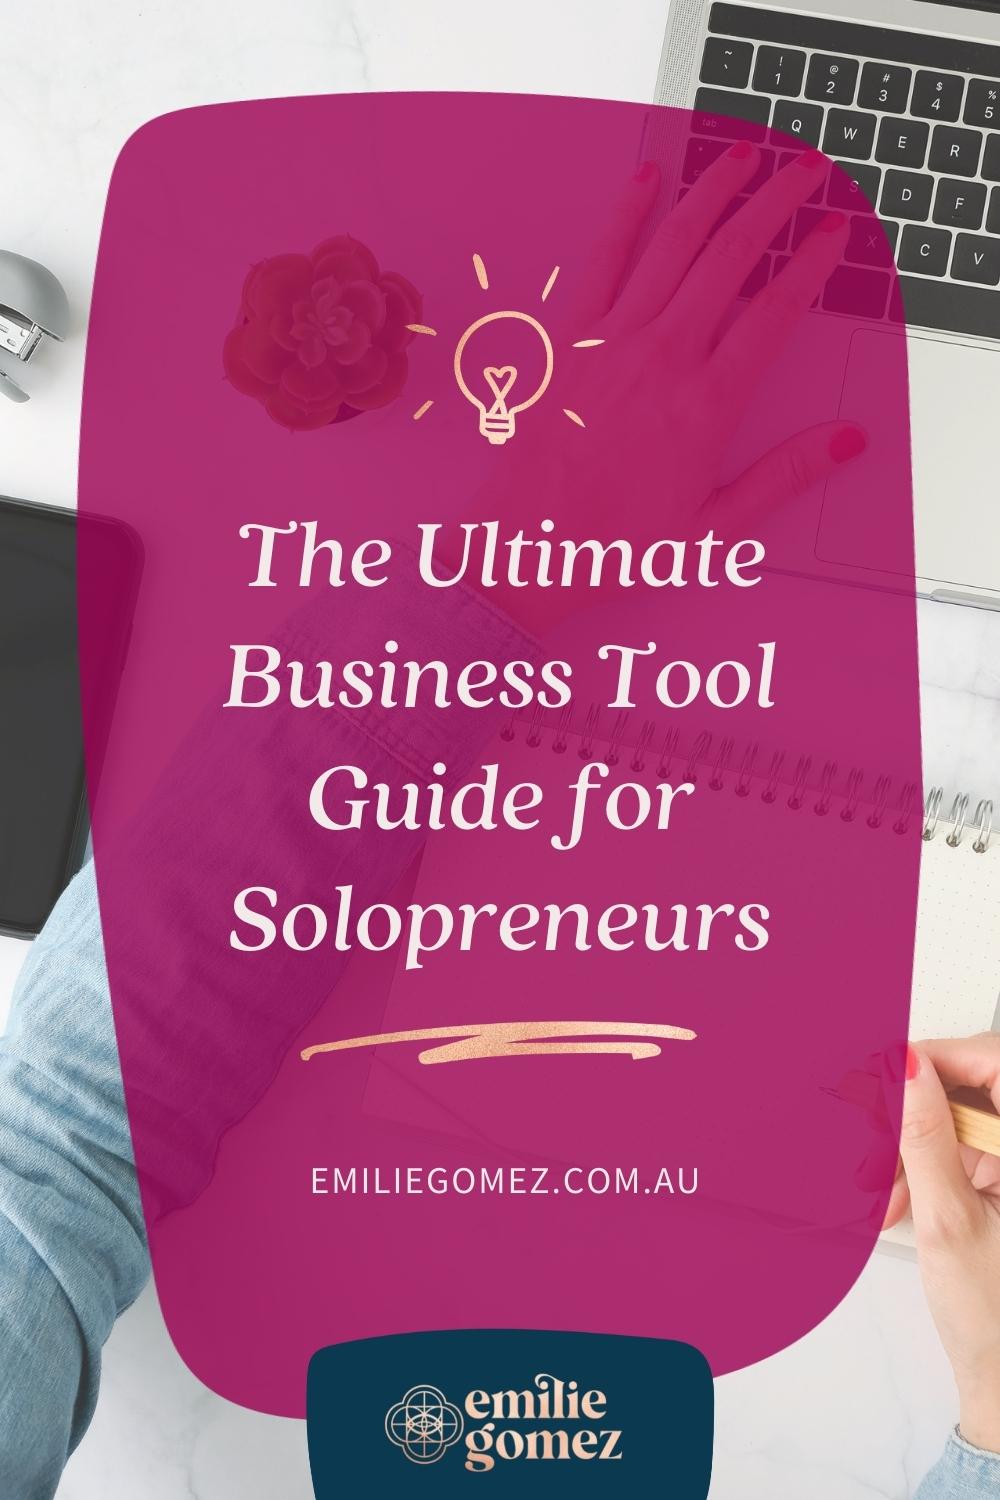 Business tools are supposed to make your life easier but it’s easy to get overwhelmed by all the different programs, apps and platforms out there. How is a solopreneur supposed to choose? I’ve got your back with this Ultimate Business Tool Guide! As a systems strategist, I’m sharing my best tips for finding the right business tool for you and your business. No sign-up needed - click through to start reading now!
